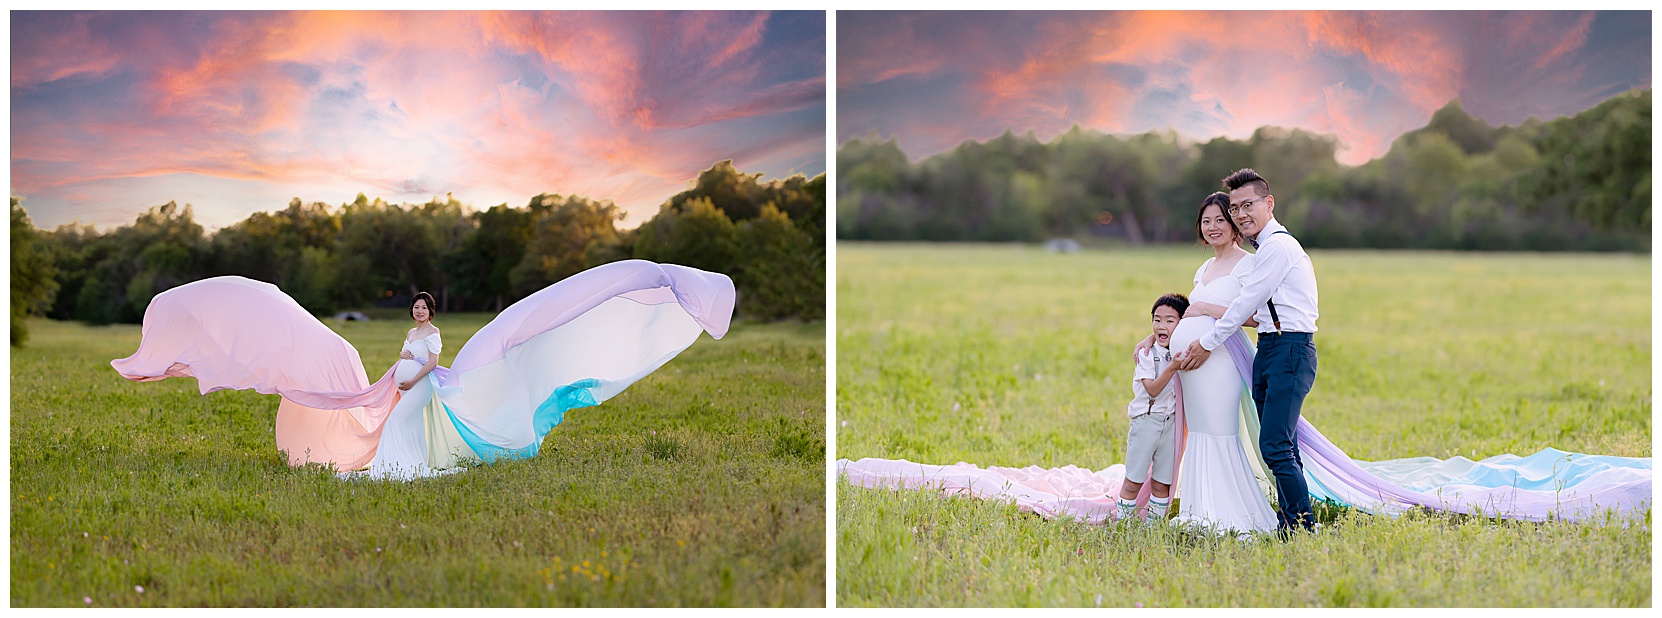 Brushy creek maternity photos featuring a mom and her family in front of a sunset